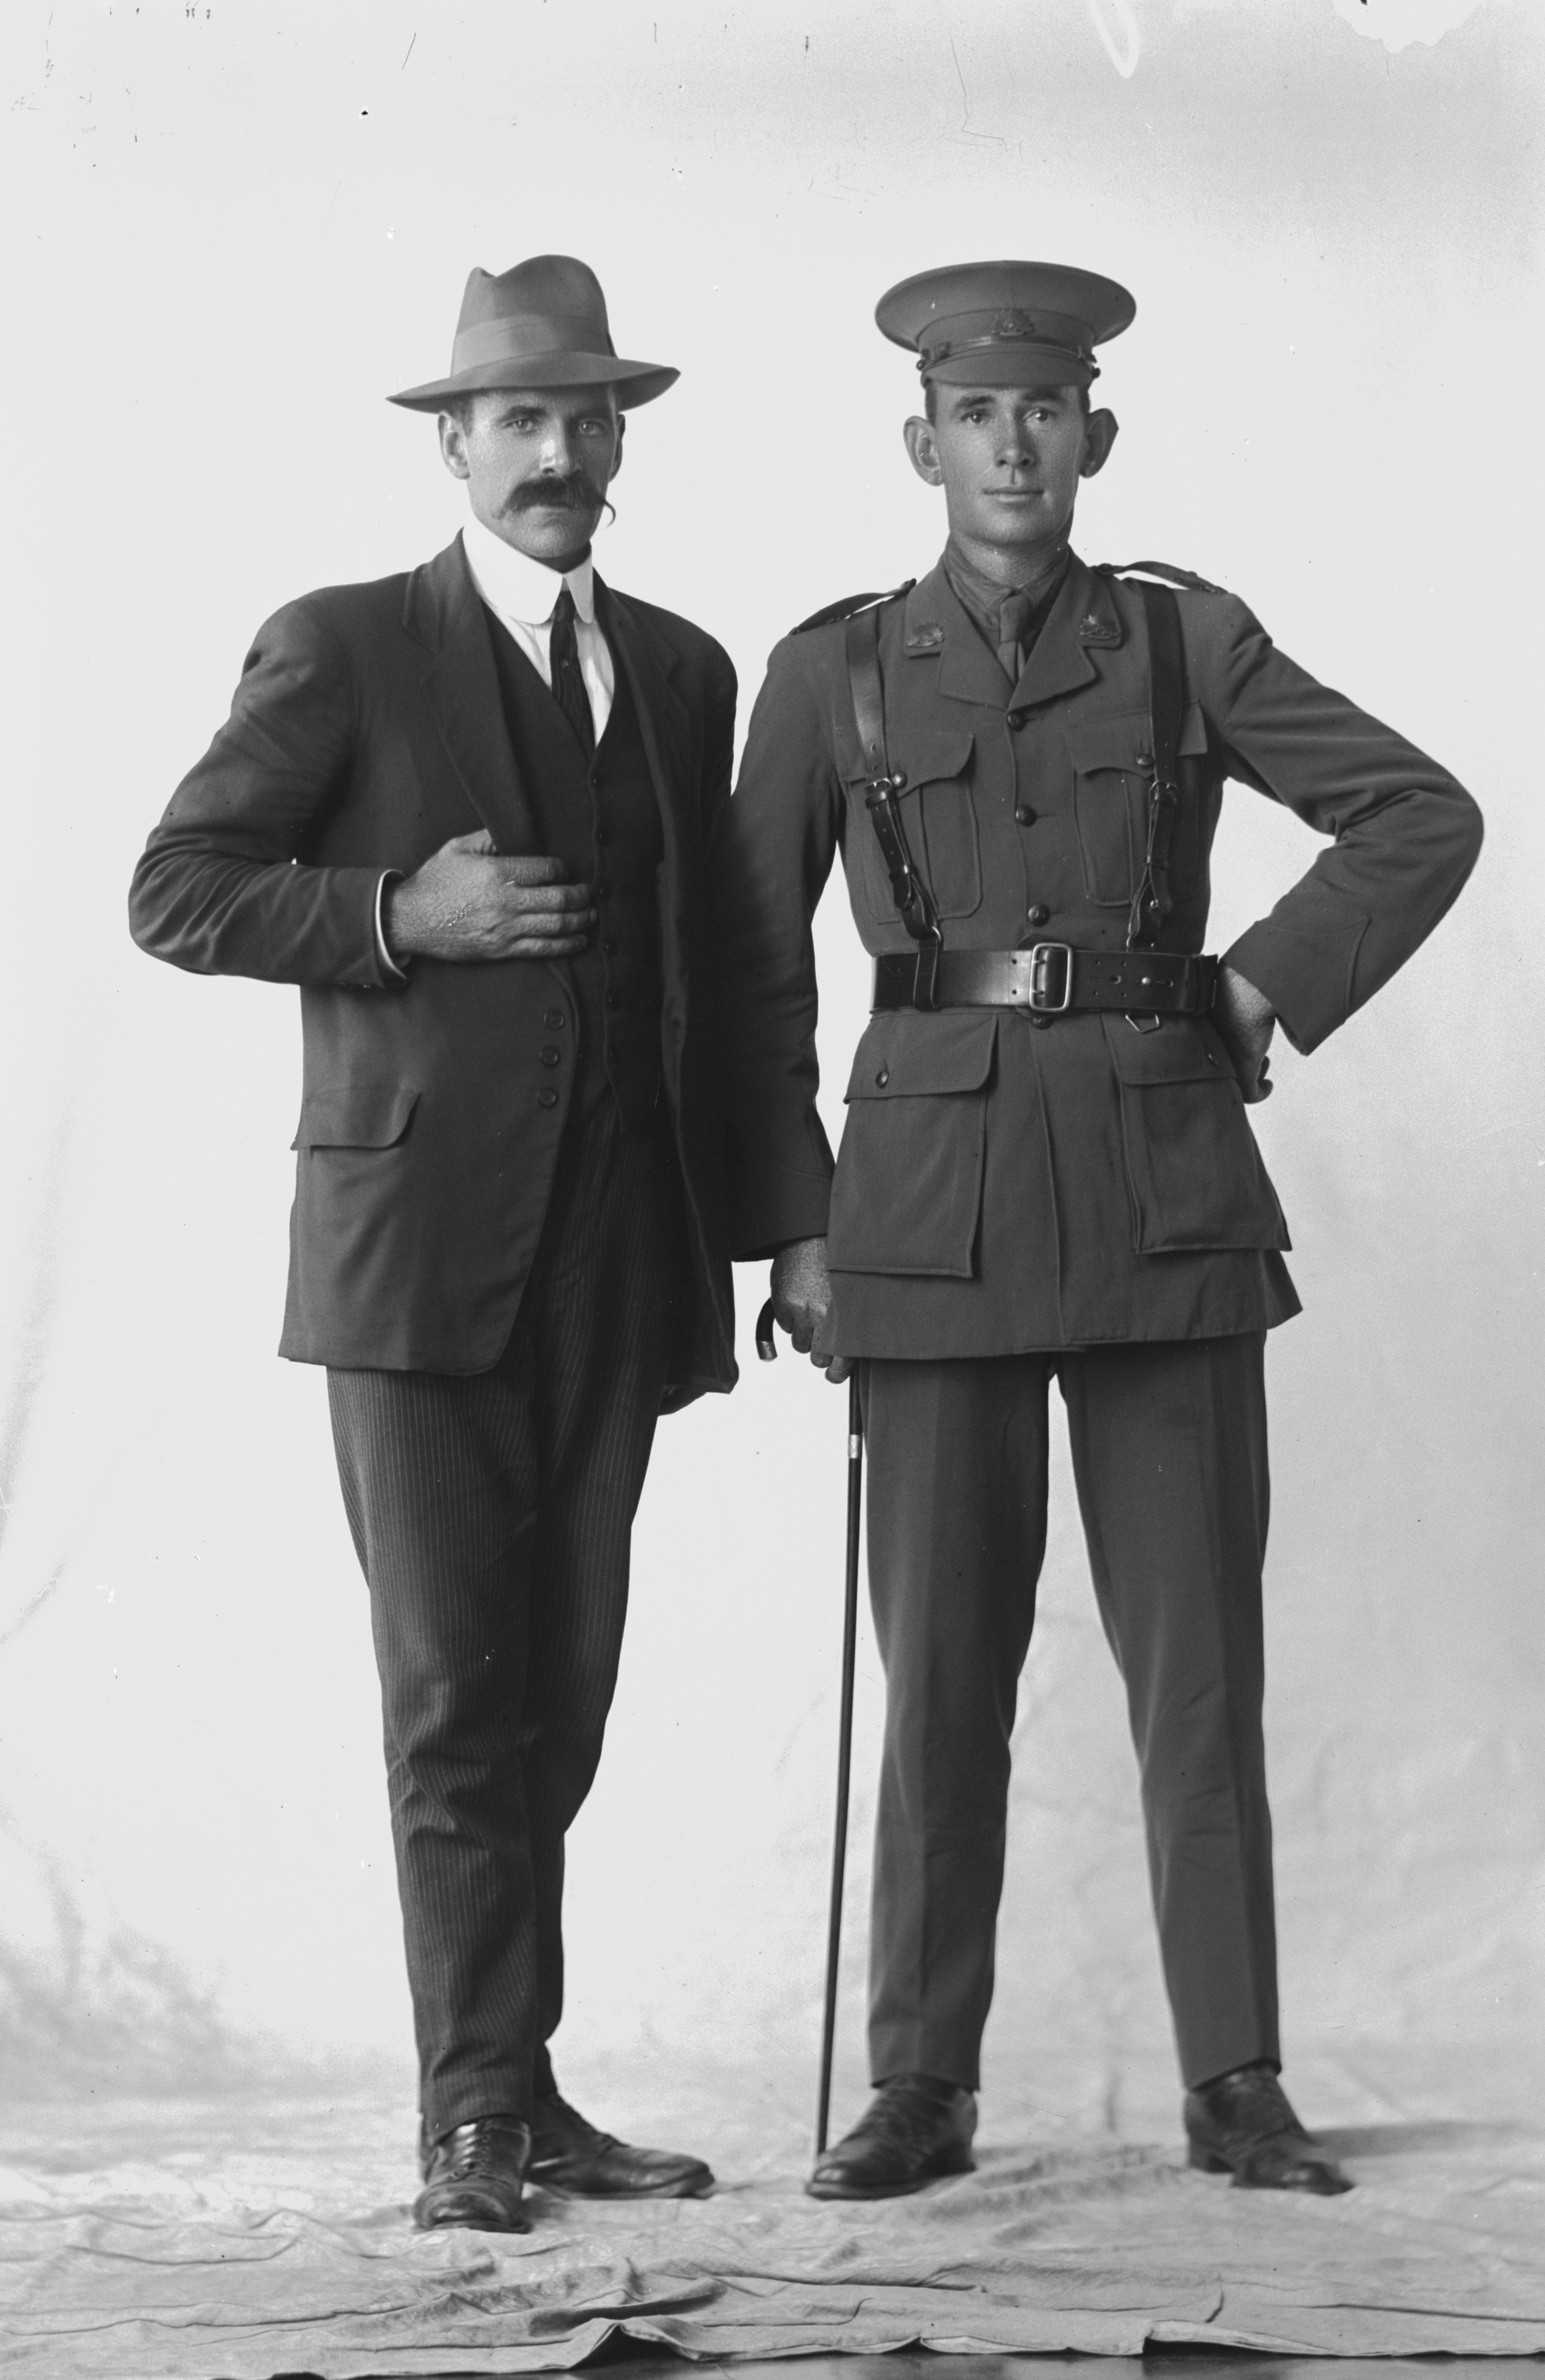 Photographed at the Dease Studio, 117 Barrack Street Perth WA Image courtesy of the State Library of Western Australia: 108709PD